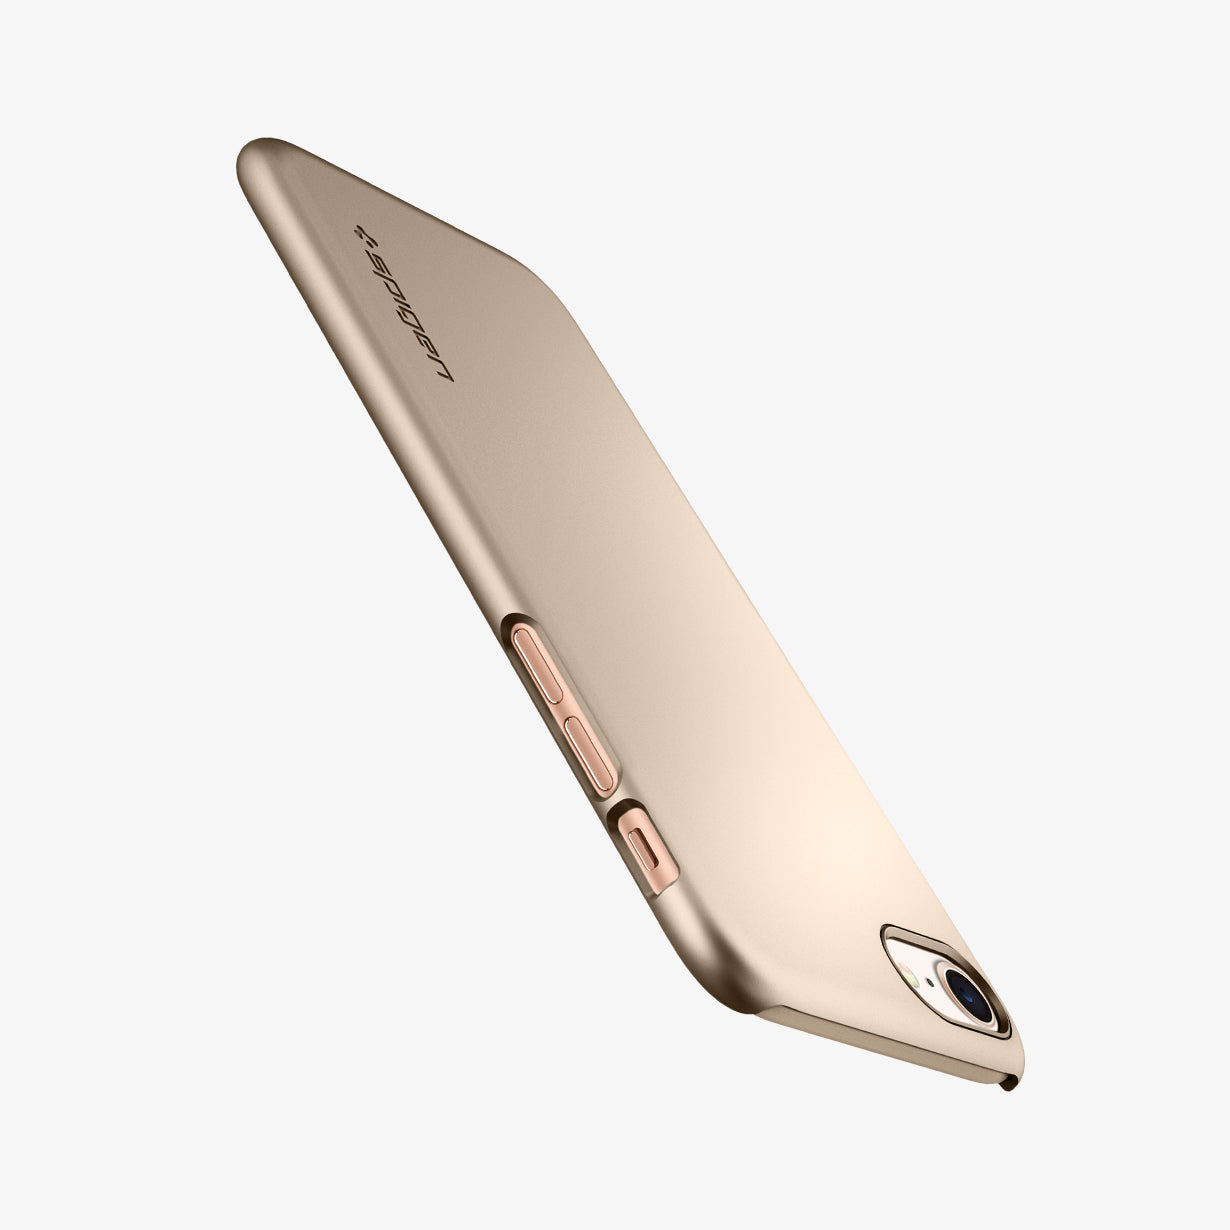 042CS20732 - iPhone SE Thin Fit case in rose gold showing the angled back